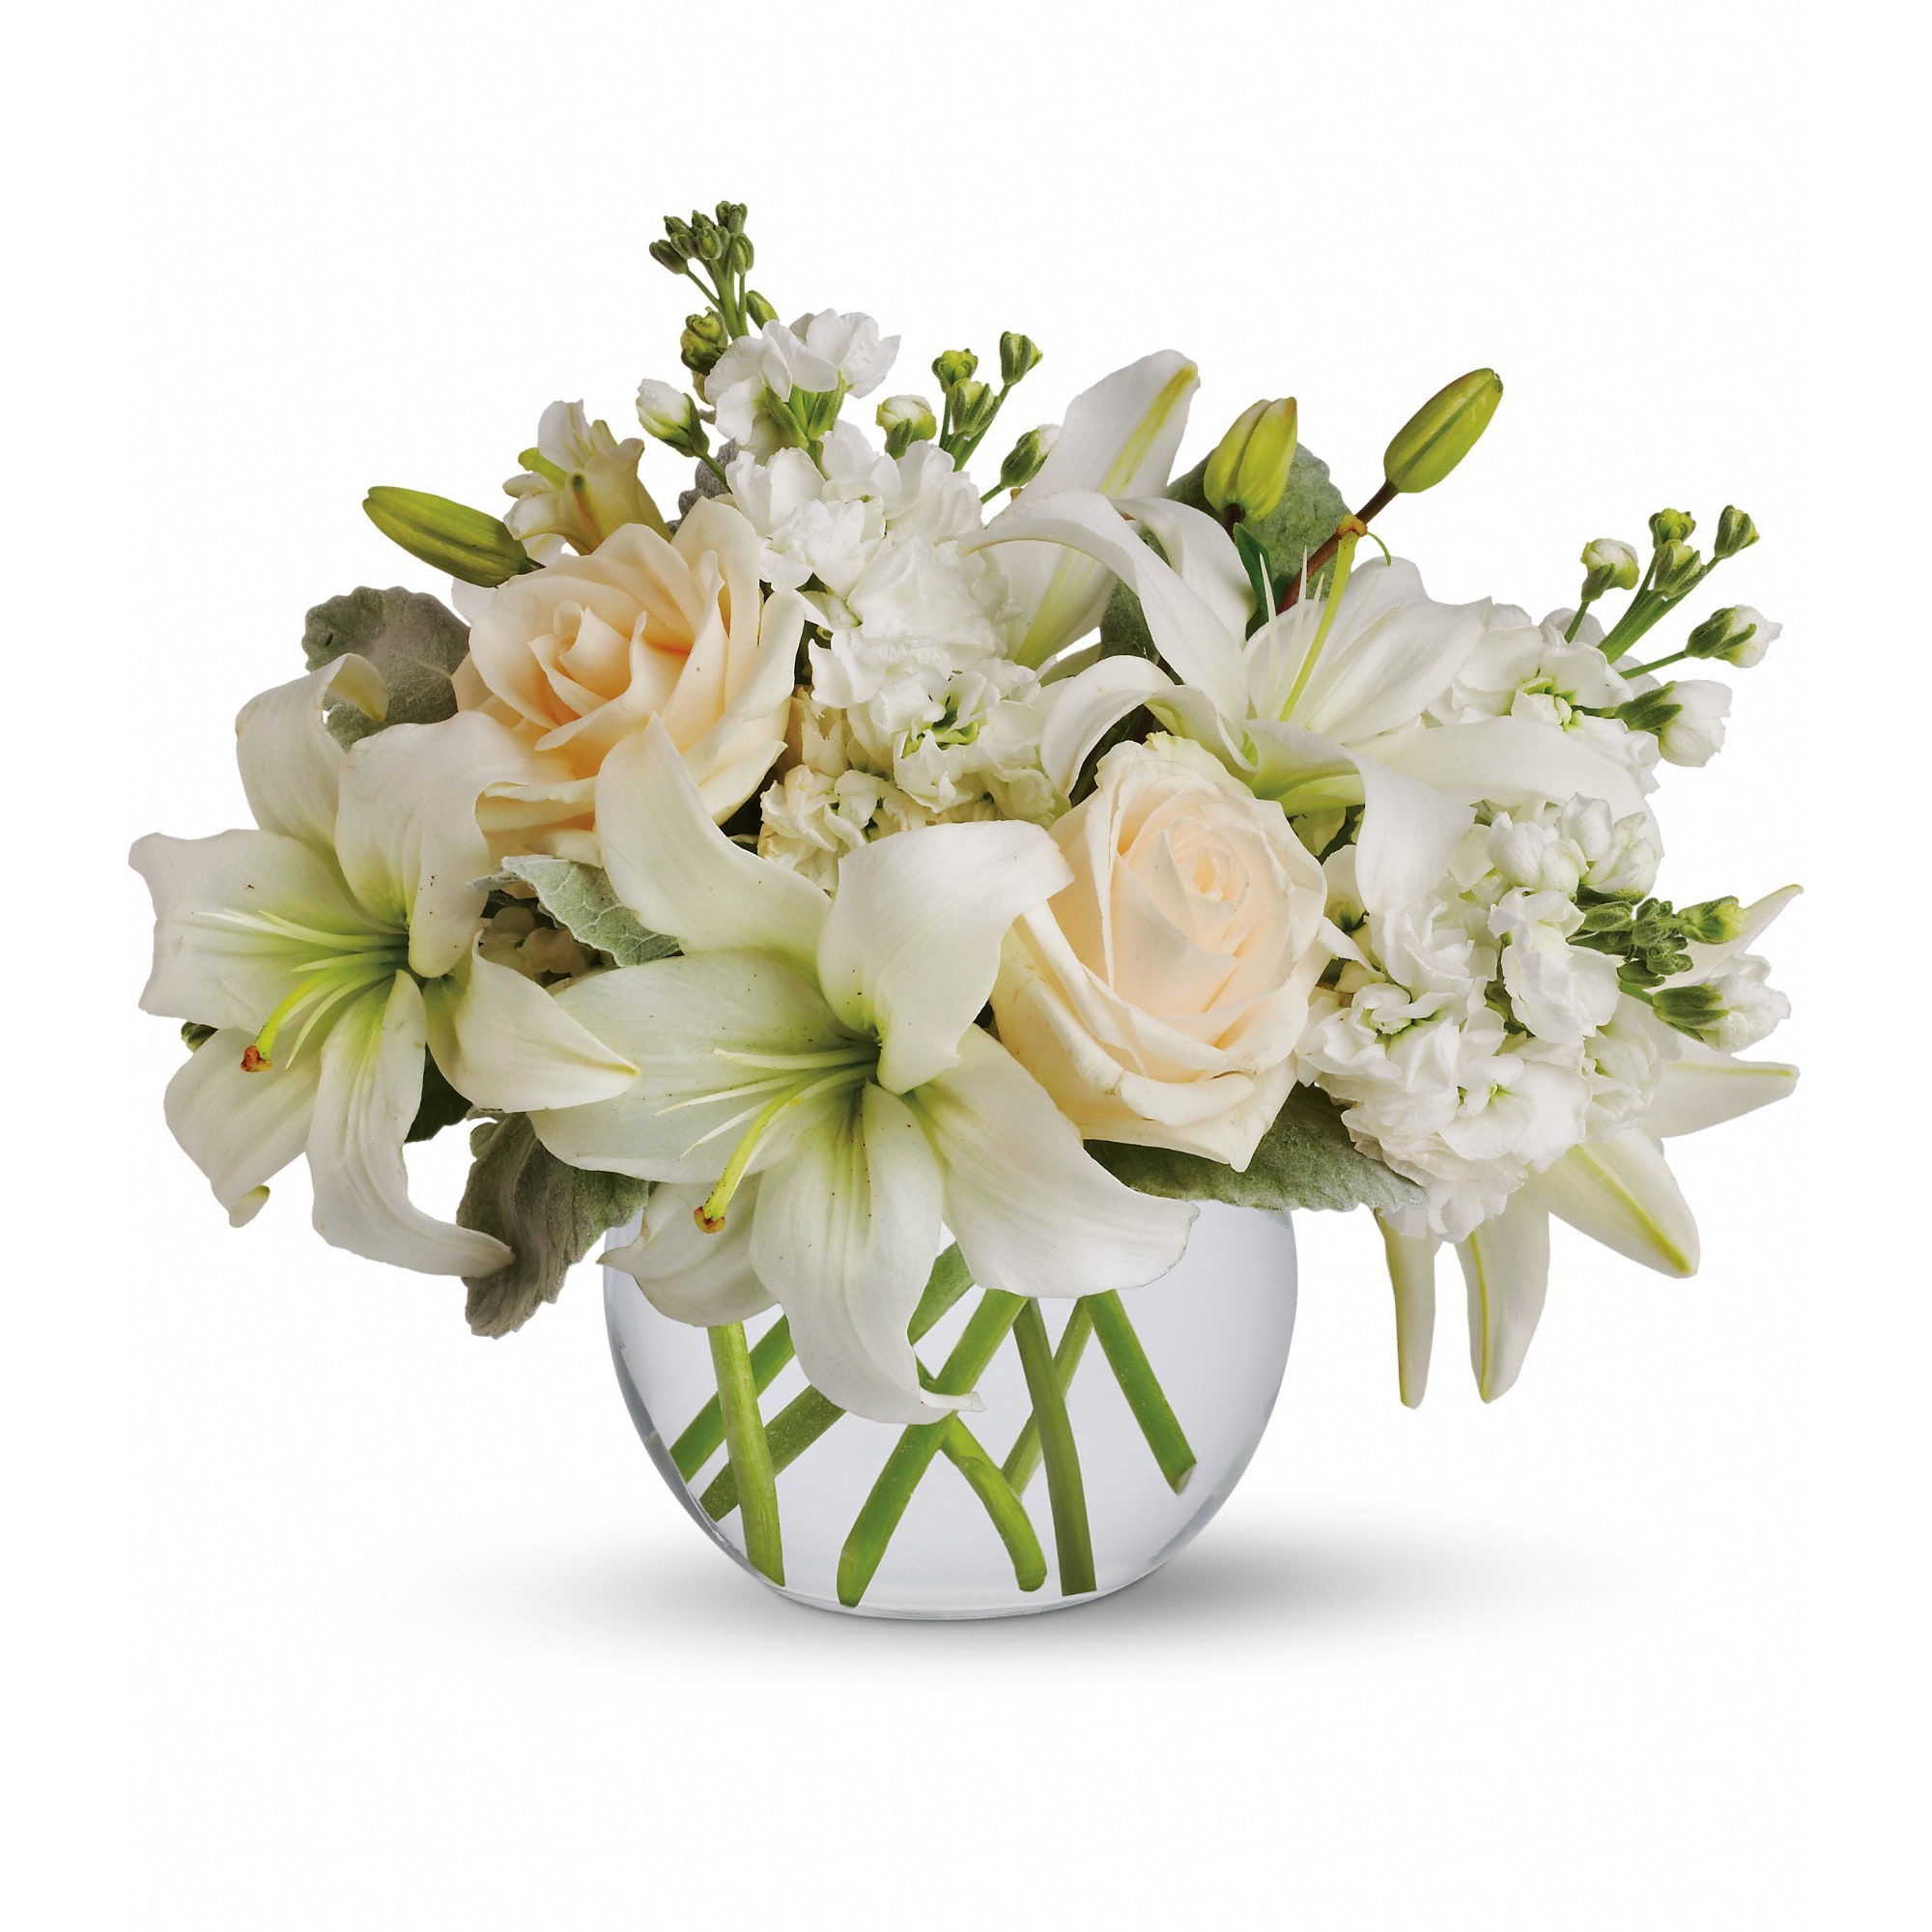 T55-3 Isle of White by Teleflora - Like a vacation for the senses, this lovely bouquet delivers an oasis of beauty and elegance. Soothing, serene and very special.